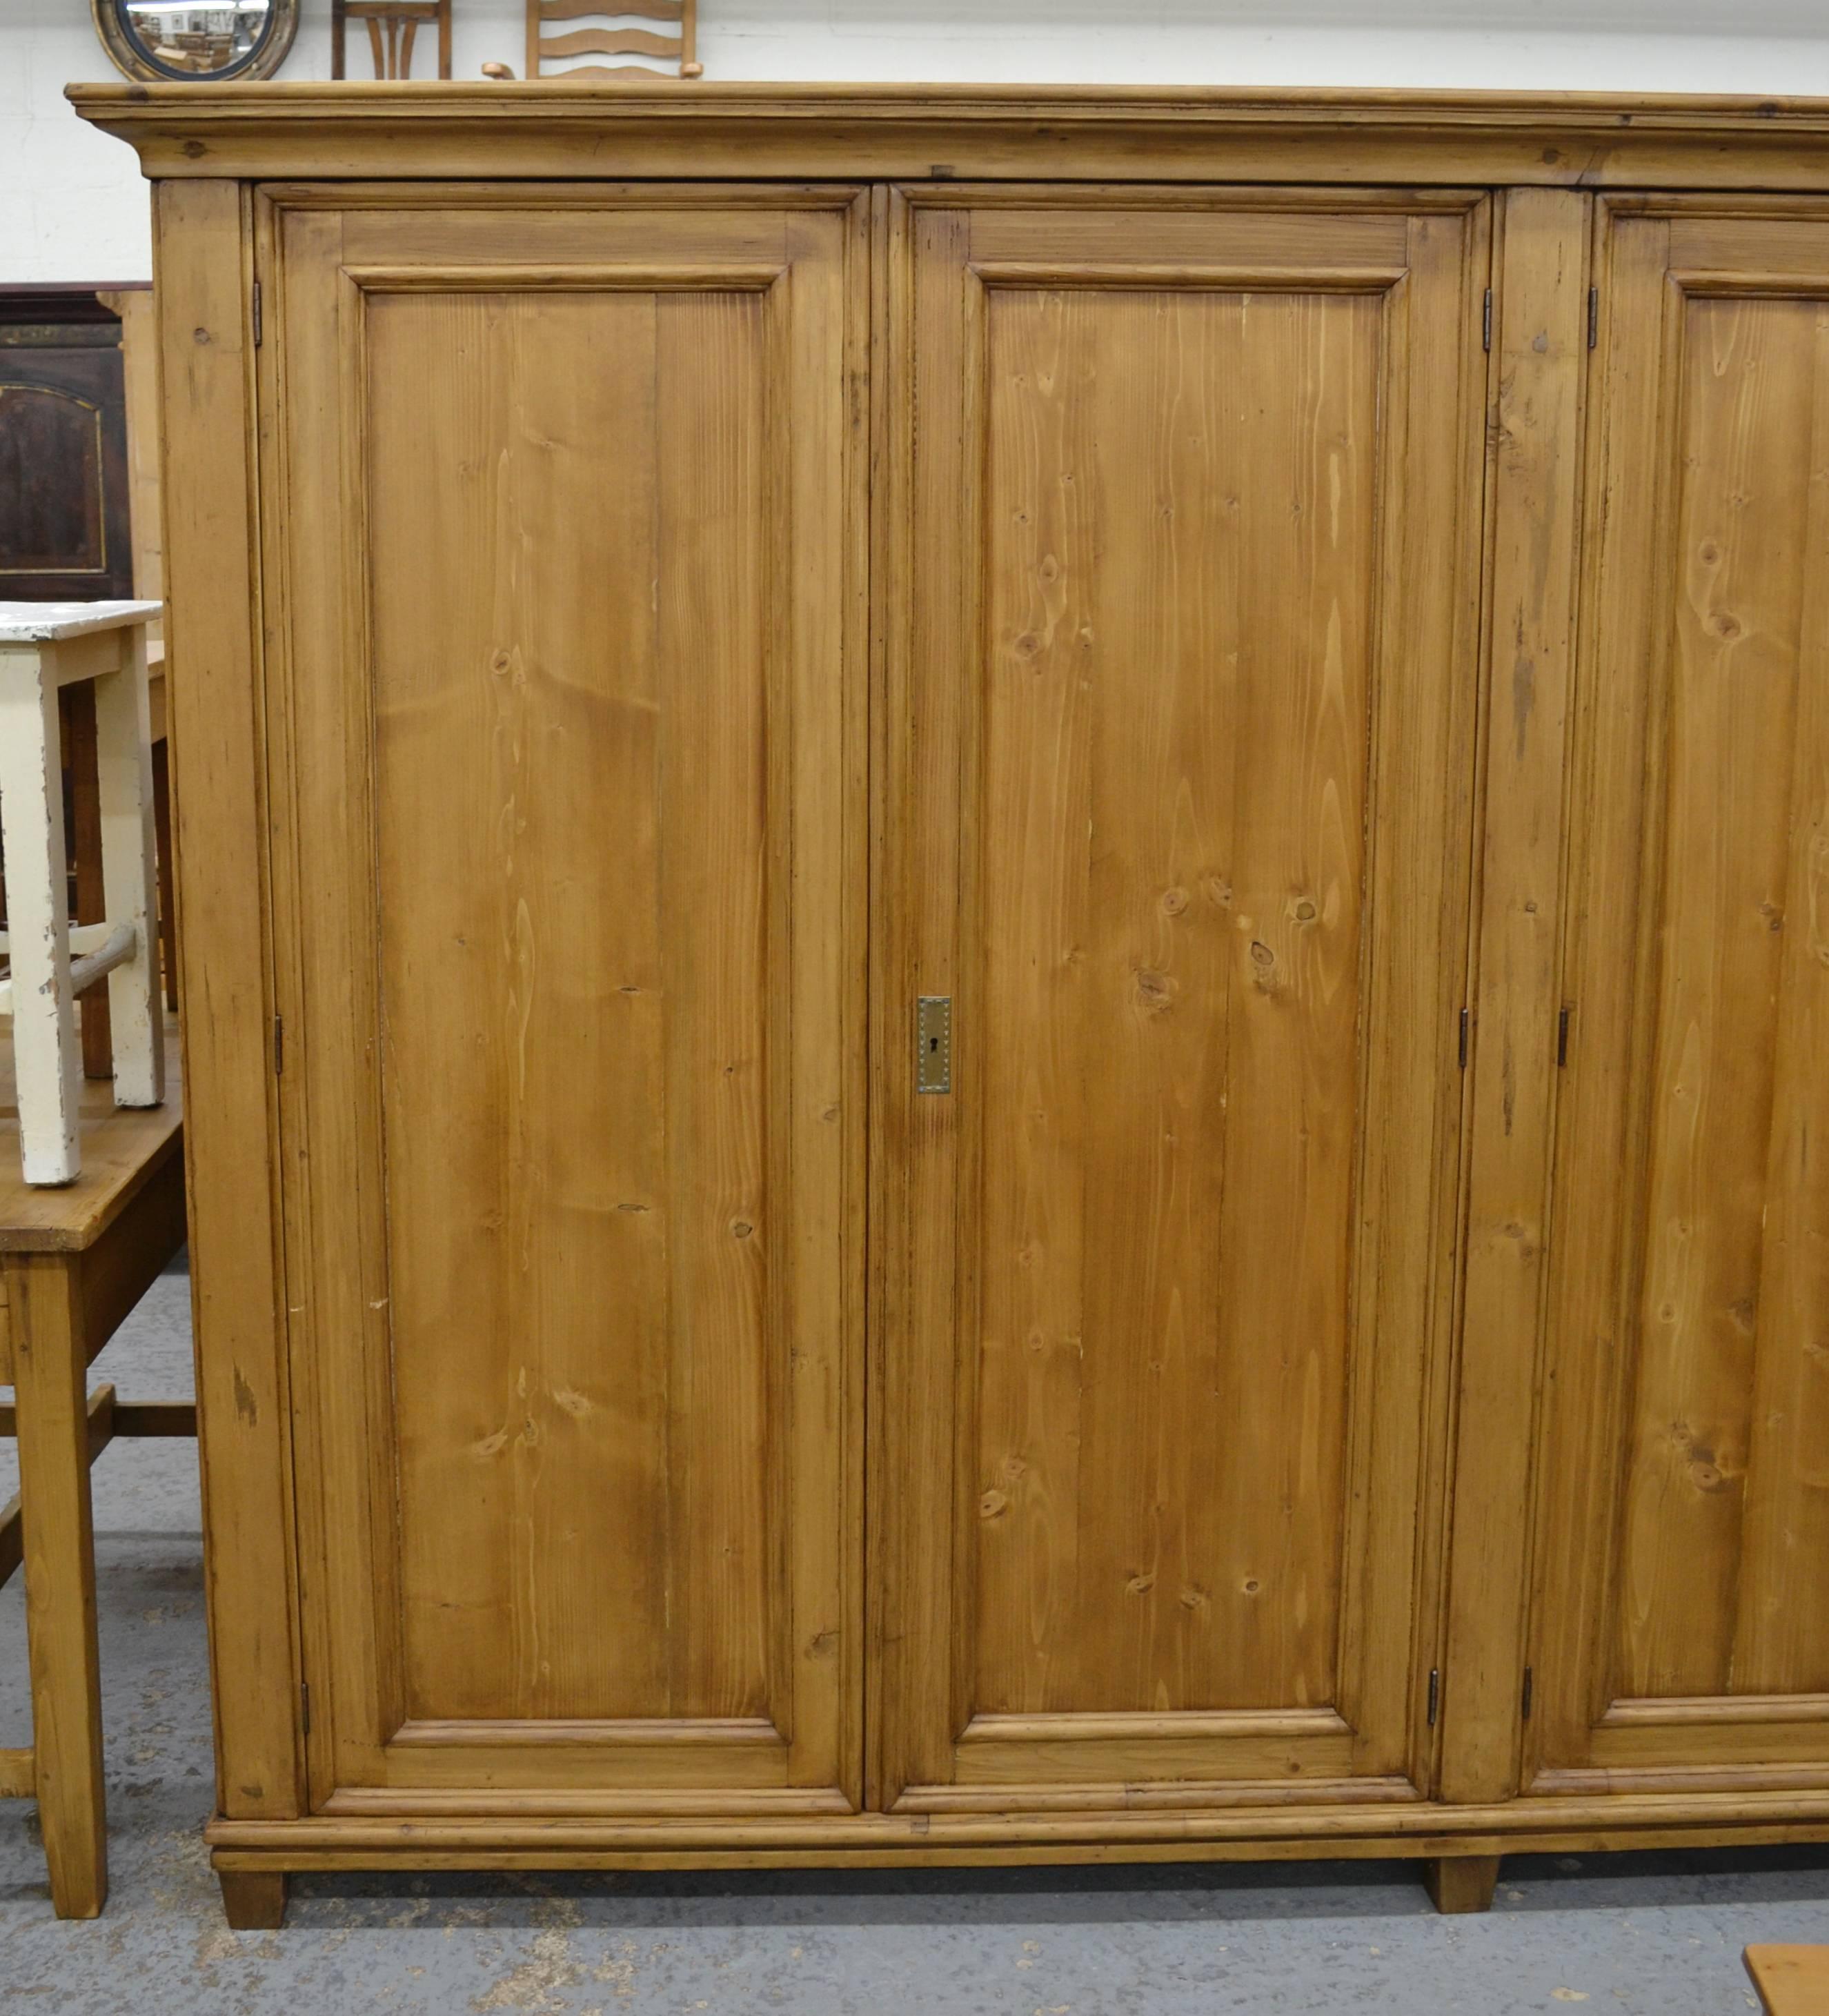 Give this four-door wardrobe a wall ten feet long and it will take care of all of your storage needs. Once a glazed display cabinet, this piece lost its glass and has been restored with panels from reclaimed pine. A bold crown sits above four